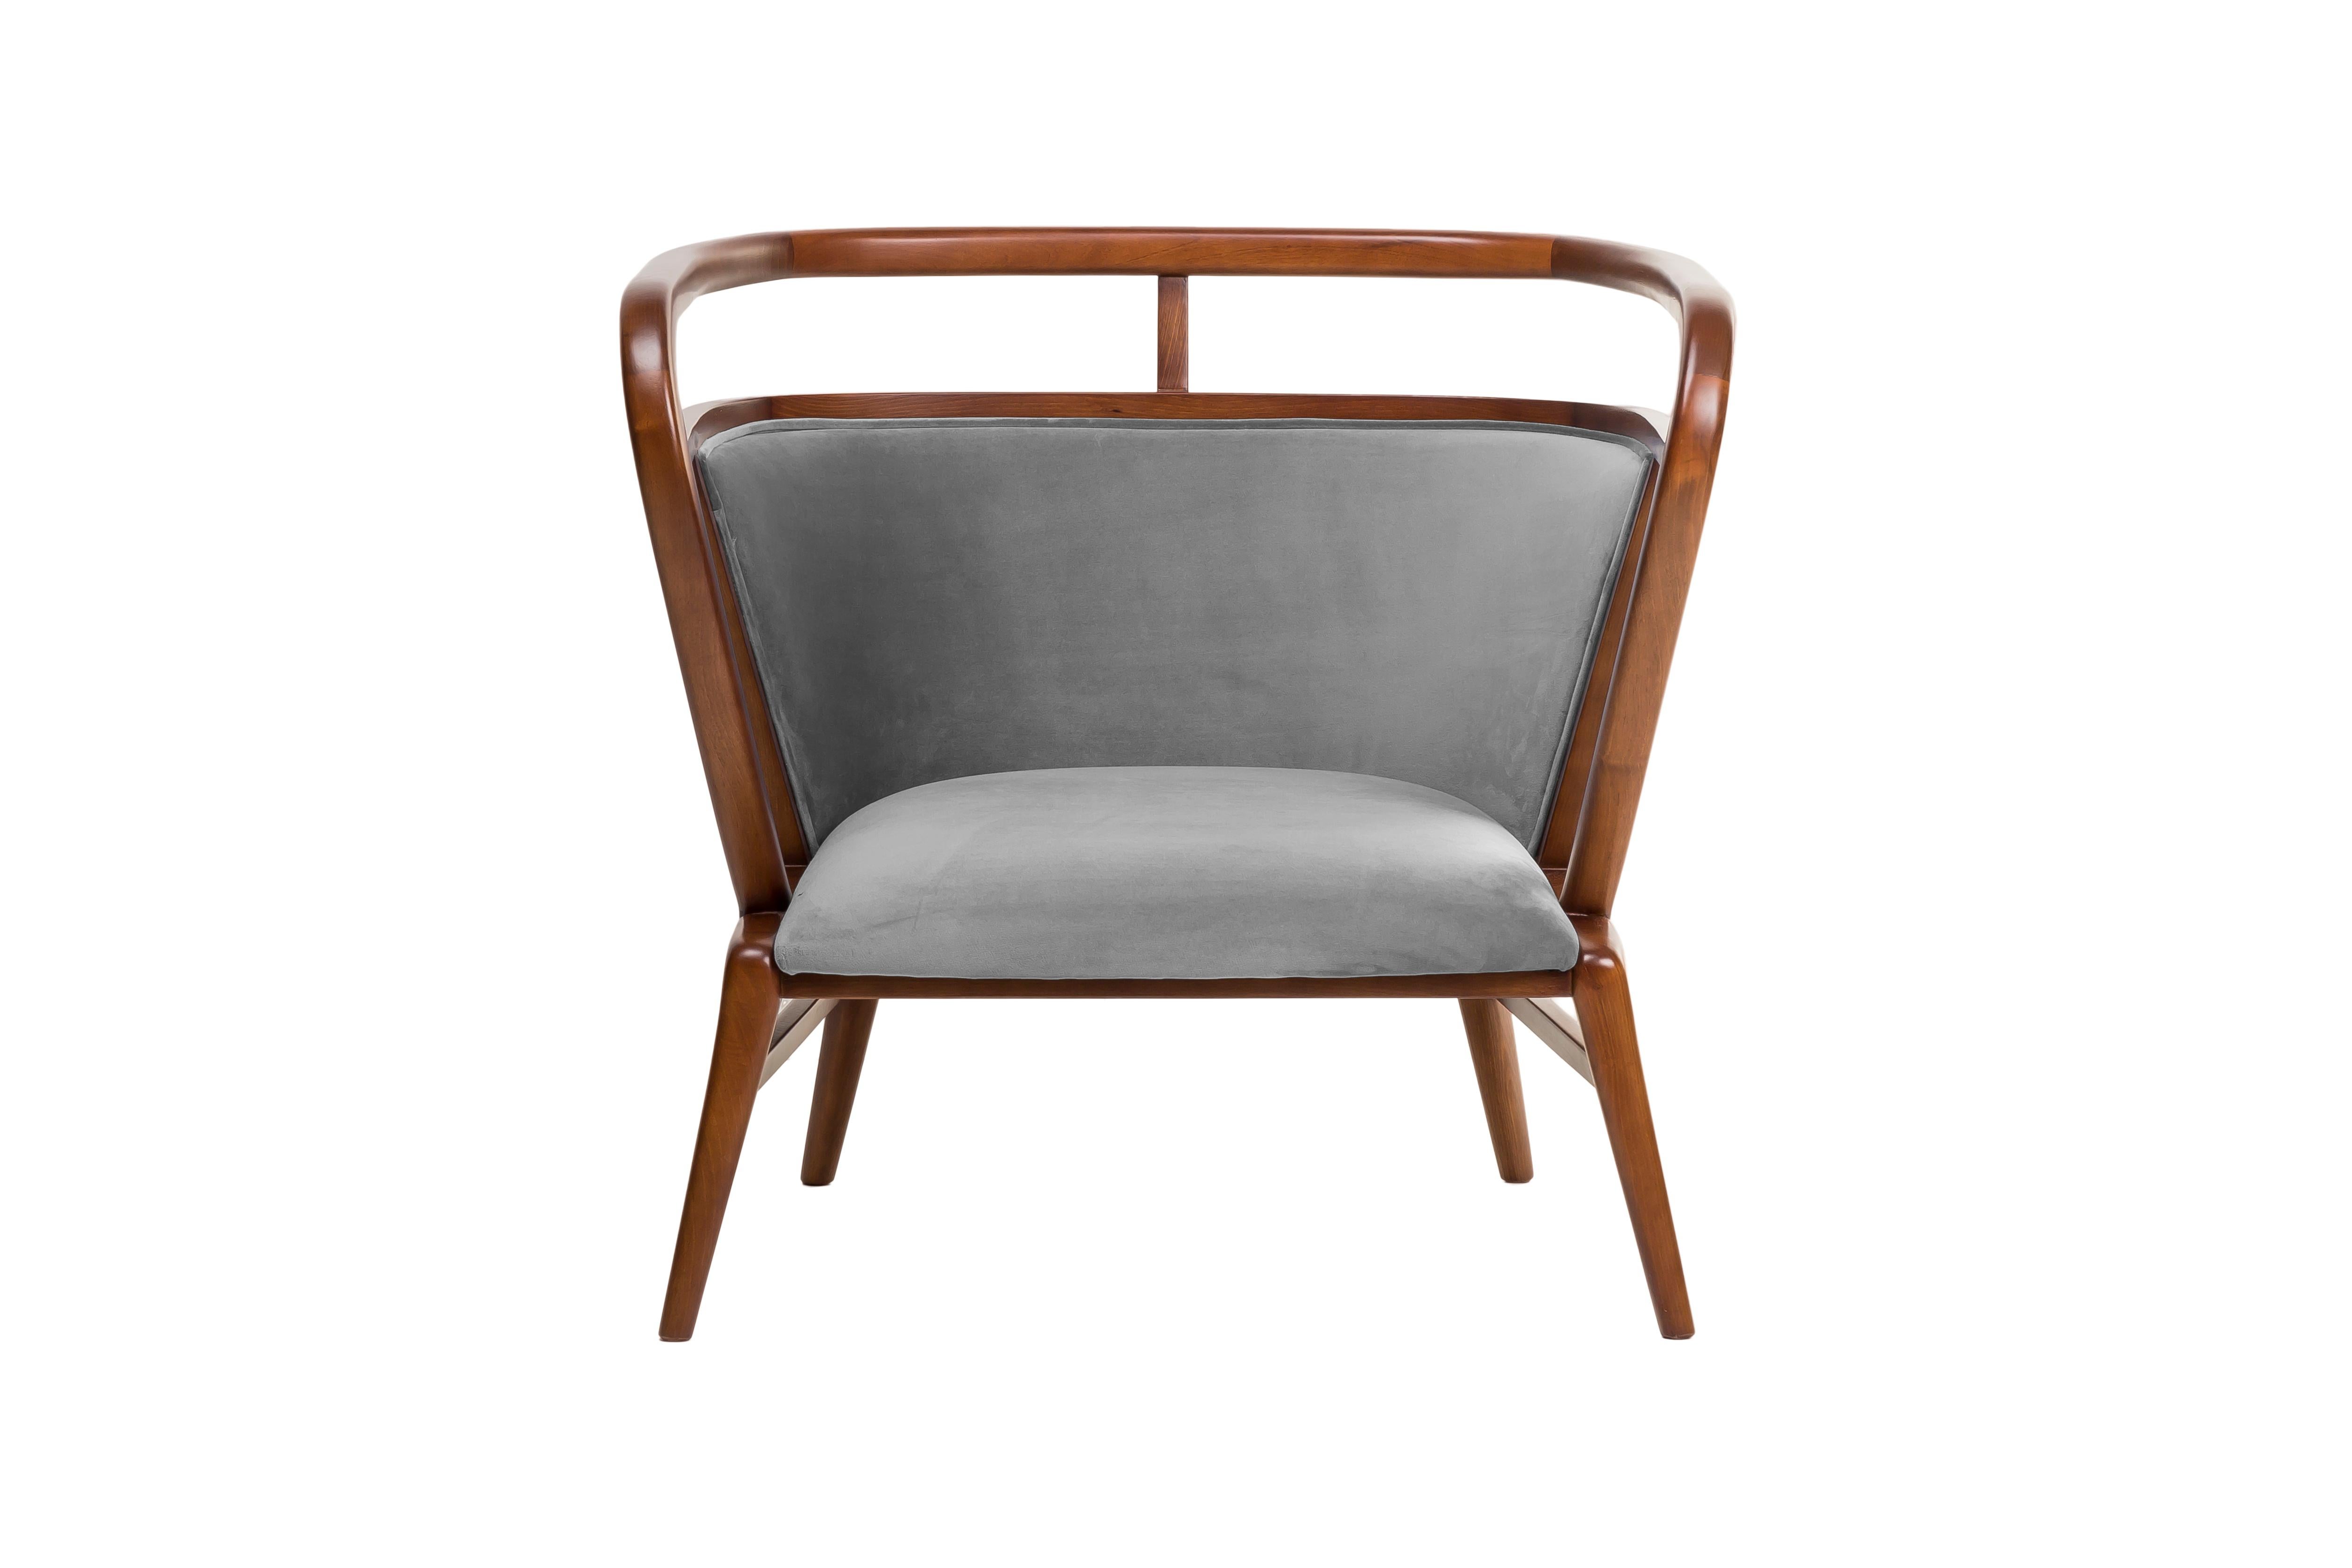 EMPIRE collection is minimally designed to bring fresh and innovative approach of soothe into any contemporary living space.
The frames of seating system are made using bentwood frame which supports wider seat cushions and backrest for visitors